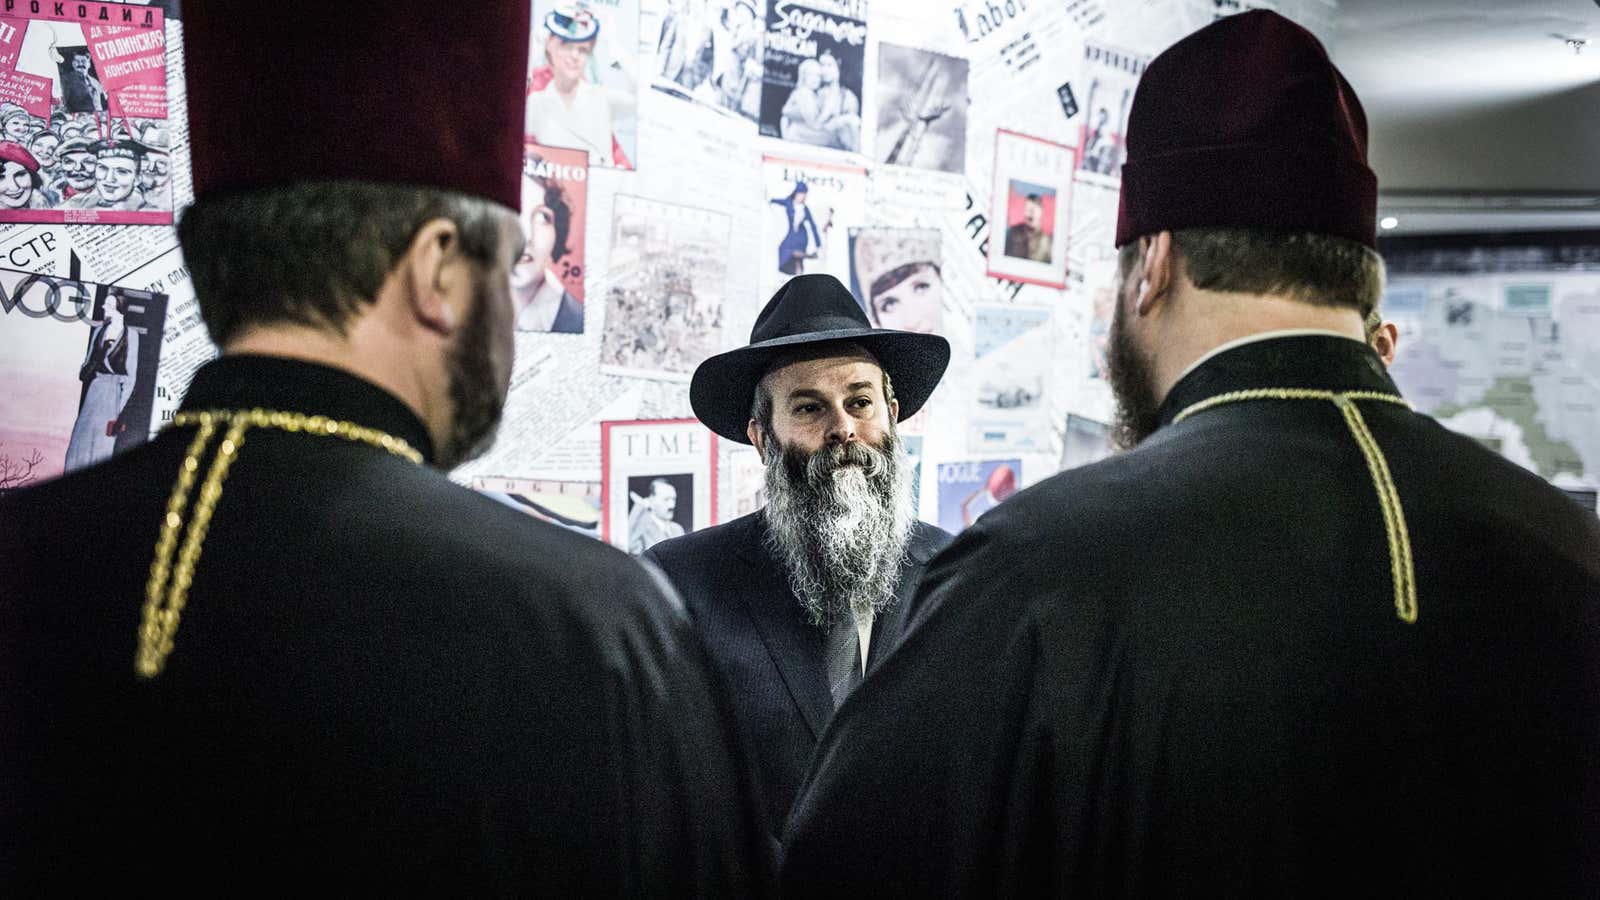 Rabbi Shmuel Kaminezki hosts other religious leaders at a Holocaust Remembrance day event in Dnipropetrovsk.